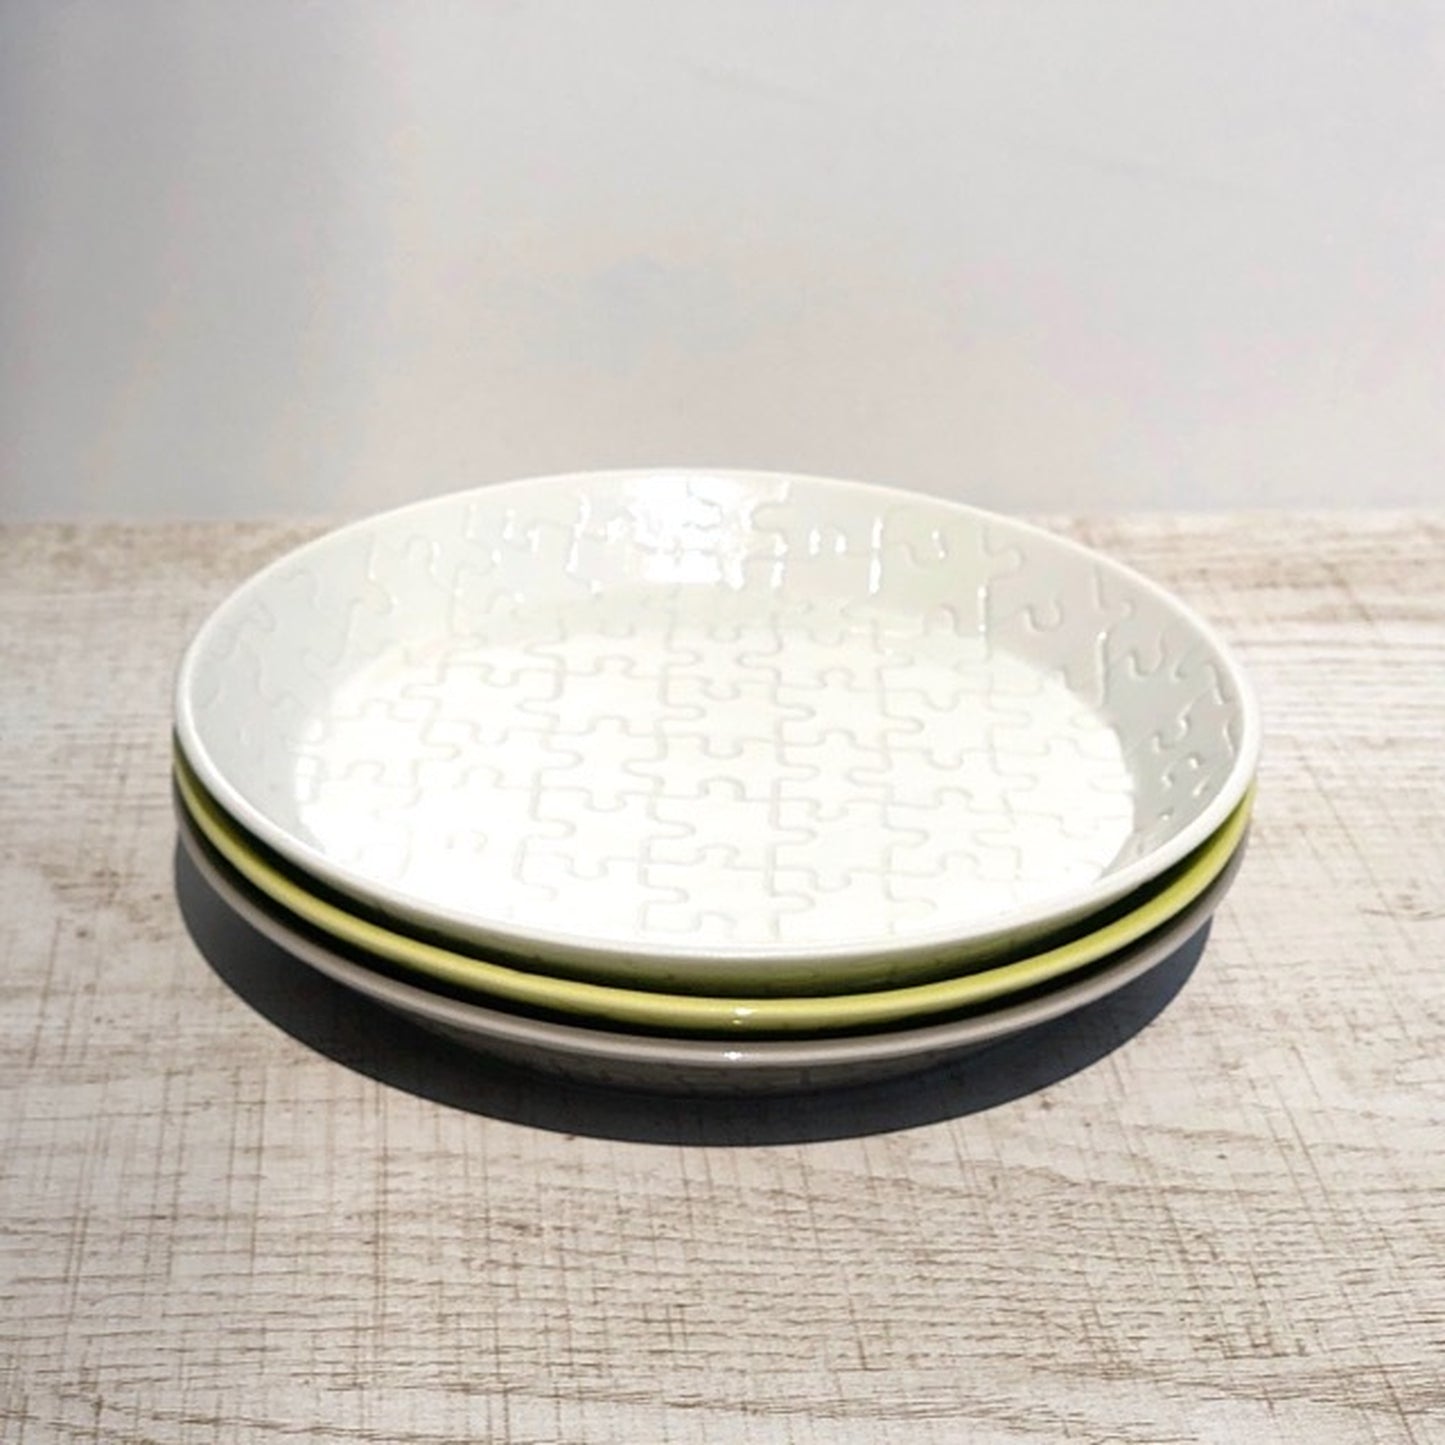 [Hasami Ware] [Nakazen] [Puzzle] [Plate M] 16.5cm Jigsaw Puzzle Plate Cake Plate Hasami Ware Fashionable Adult Colorful Cute